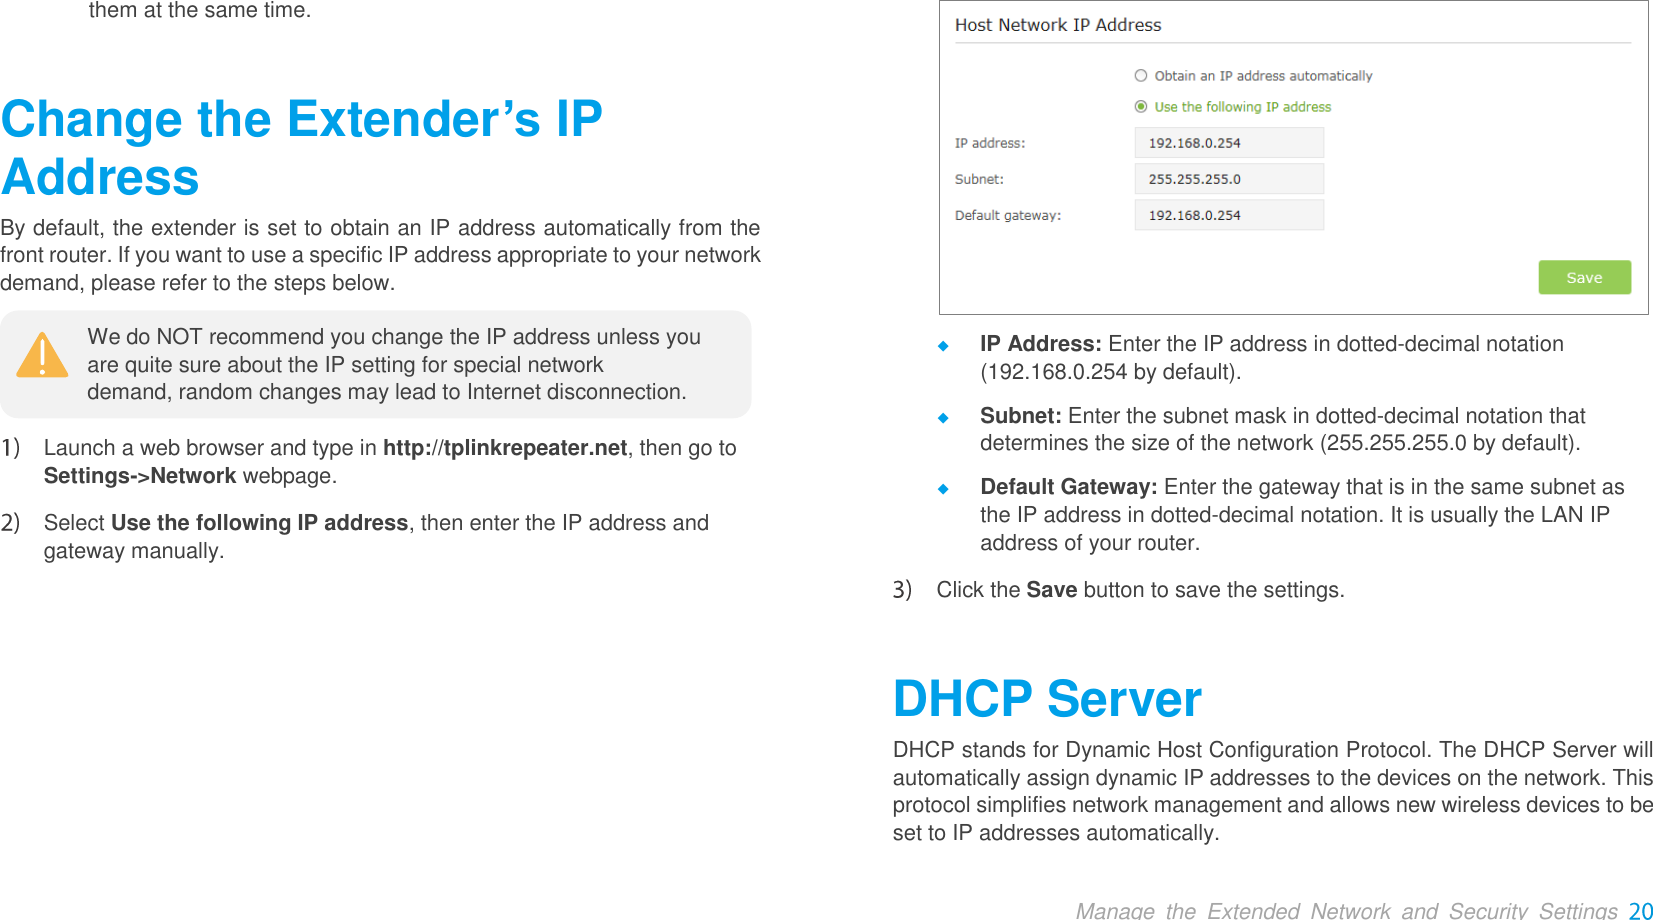  Manage  the  Extended  Network  and  Security  Settings them at the same time. Change the Extender’s IP AddressBy default, the extender is set to obtain an IP address automatically from the front router. If you want to use a specific IP address appropriate to your network demand, please refer to the steps below.   Launch a web browser and type in http://tplinkrepeater.net, then go to Settings-&gt;Network webpage.    Select Use the following IP address, then enter the IP address and gateway manually.   IP Address: Enter the IP address in dotted-decimal notation (192.168.0.254 by default).  Subnet: Enter the subnet mask in dotted-decimal notation that determines the size of the network (255.255.255.0 by default).  Default Gateway: Enter the gateway that is in the same subnet as the IP address in dotted-decimal notation. It is usually the LAN IP address of your router.  Click the Save button to save the settings. DHCP Server DHCP stands for Dynamic Host Configuration Protocol. The DHCP Server will automatically assign dynamic IP addresses to the devices on the network. This protocol simplifies network management and allows new wireless devices to be set to IP addresses automatically. We do NOT recommend you change the IP address unless you are quite sure about the IP setting for special network demand, random changes may lead to Internet disconnection. 